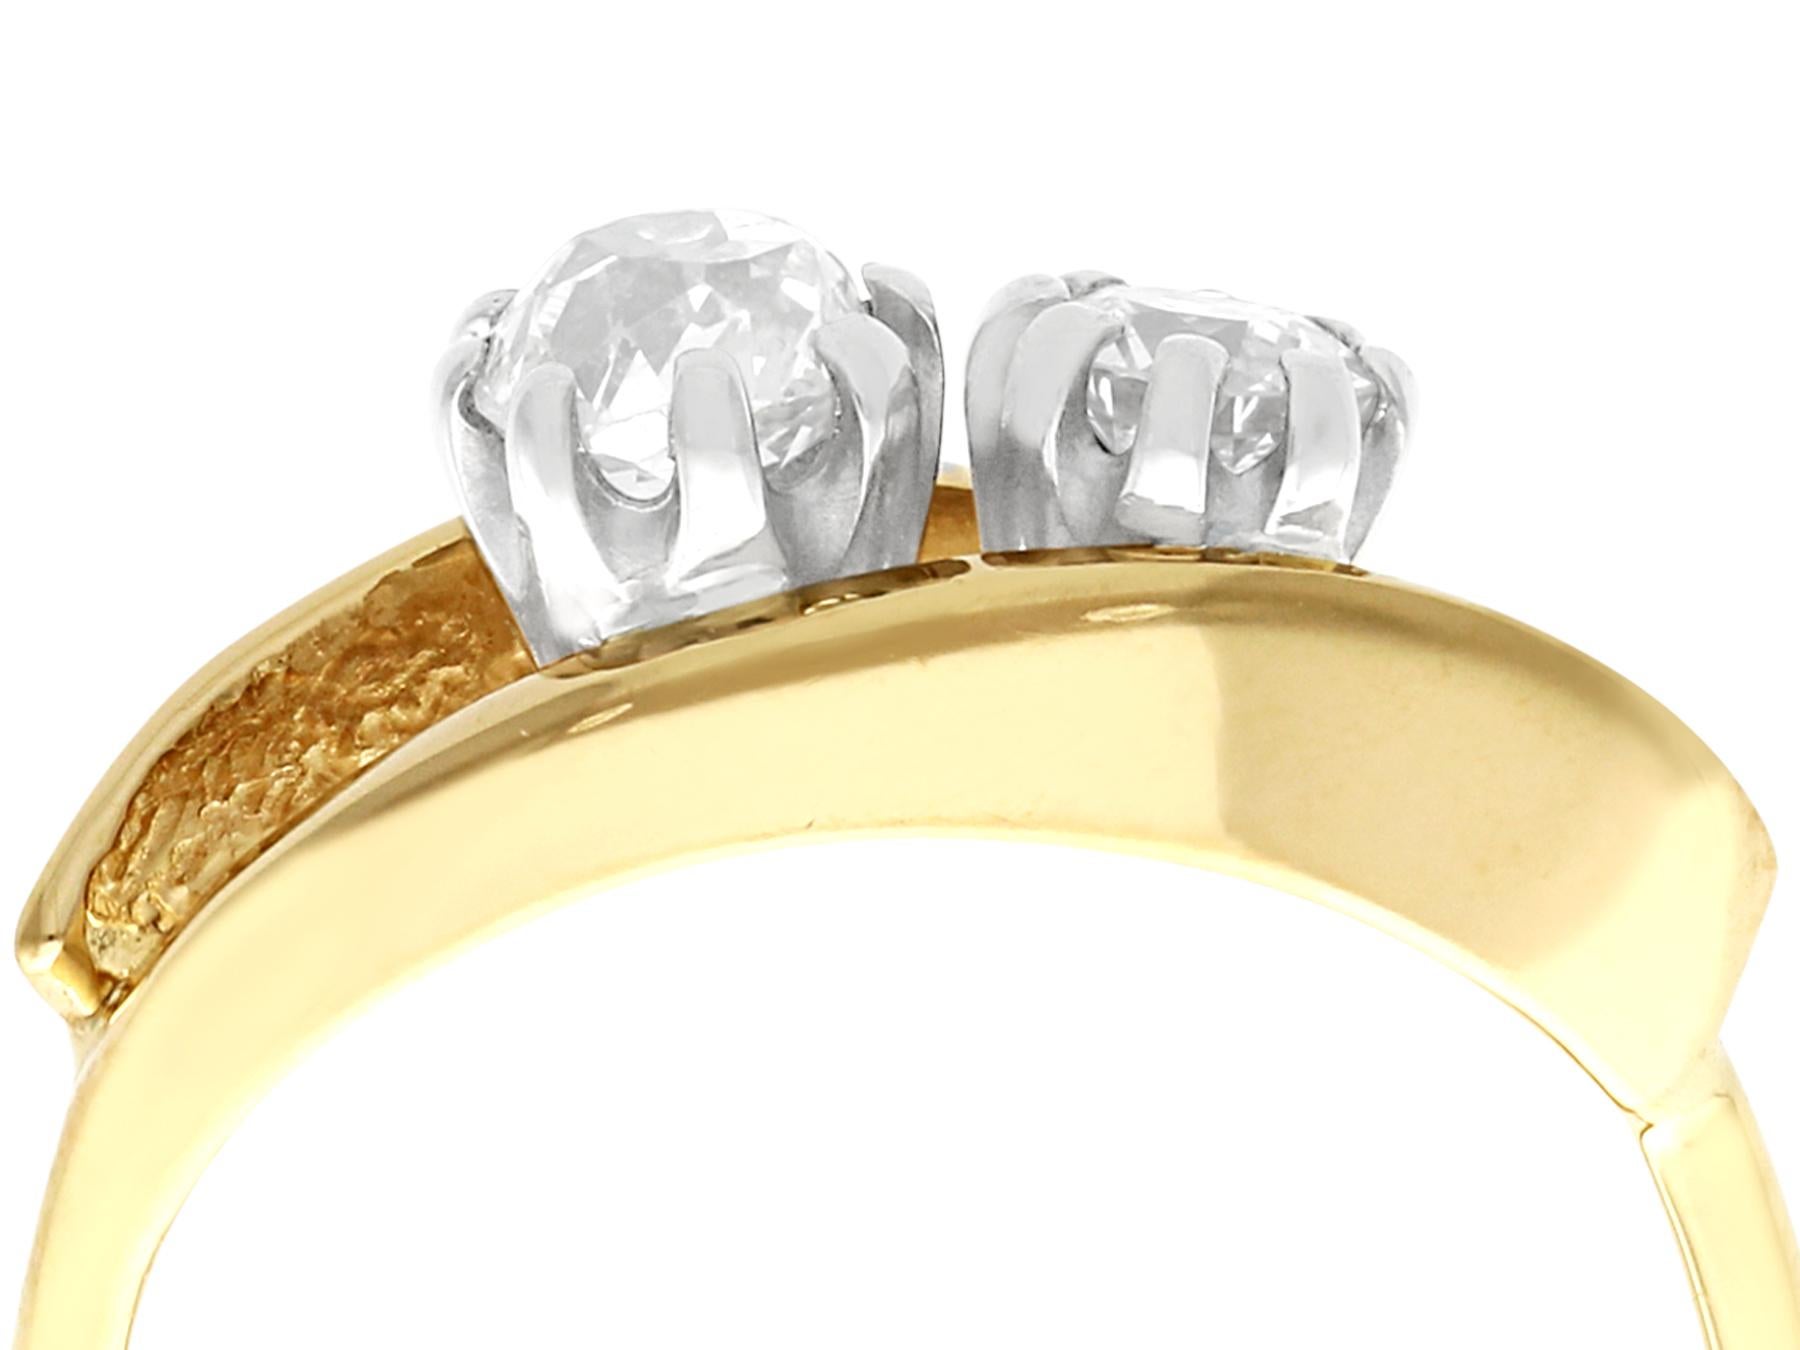 Two antique diamonds displayed in a contemporary 18 karat yellow gold setting; part of our diamond jewellery and estate jewelry collections.

This impressive two stone ring has been crafted in 18k yellow gold.

The contemporary pierced decorated